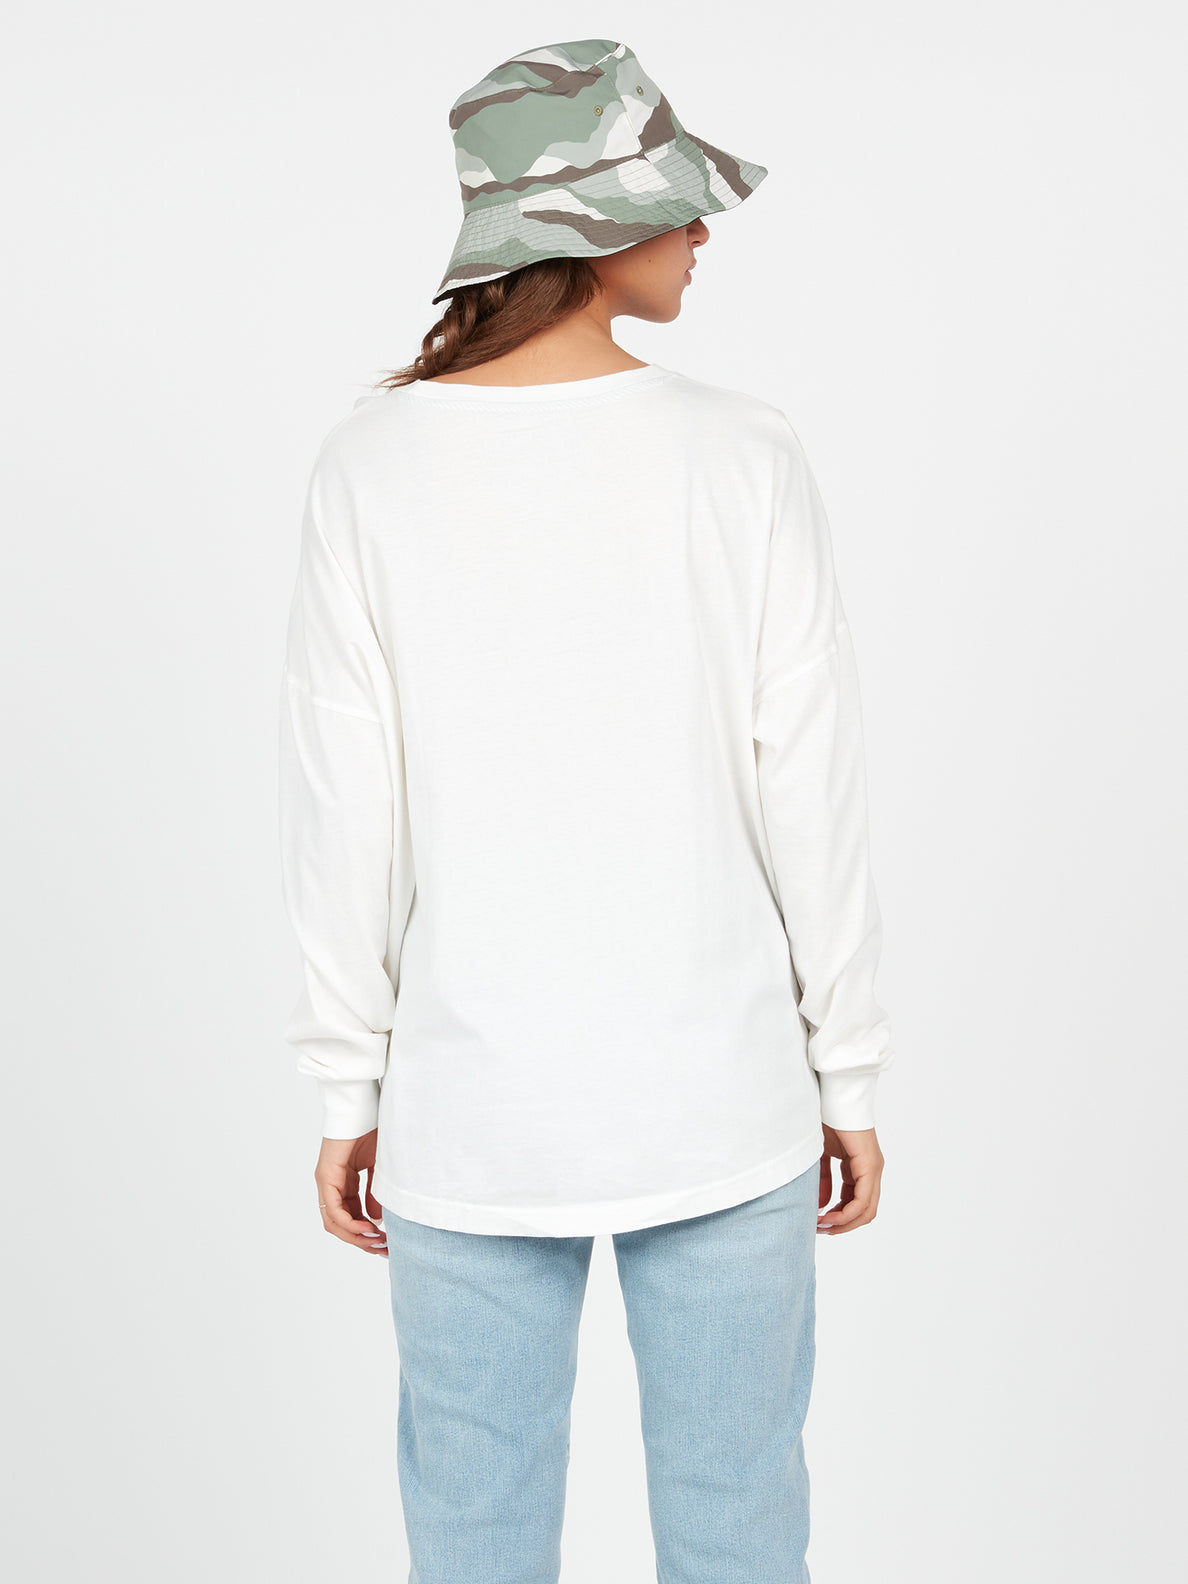 Werking Doubles Long Sleeve Shirt - Star White (B3642202_SWH) [B]